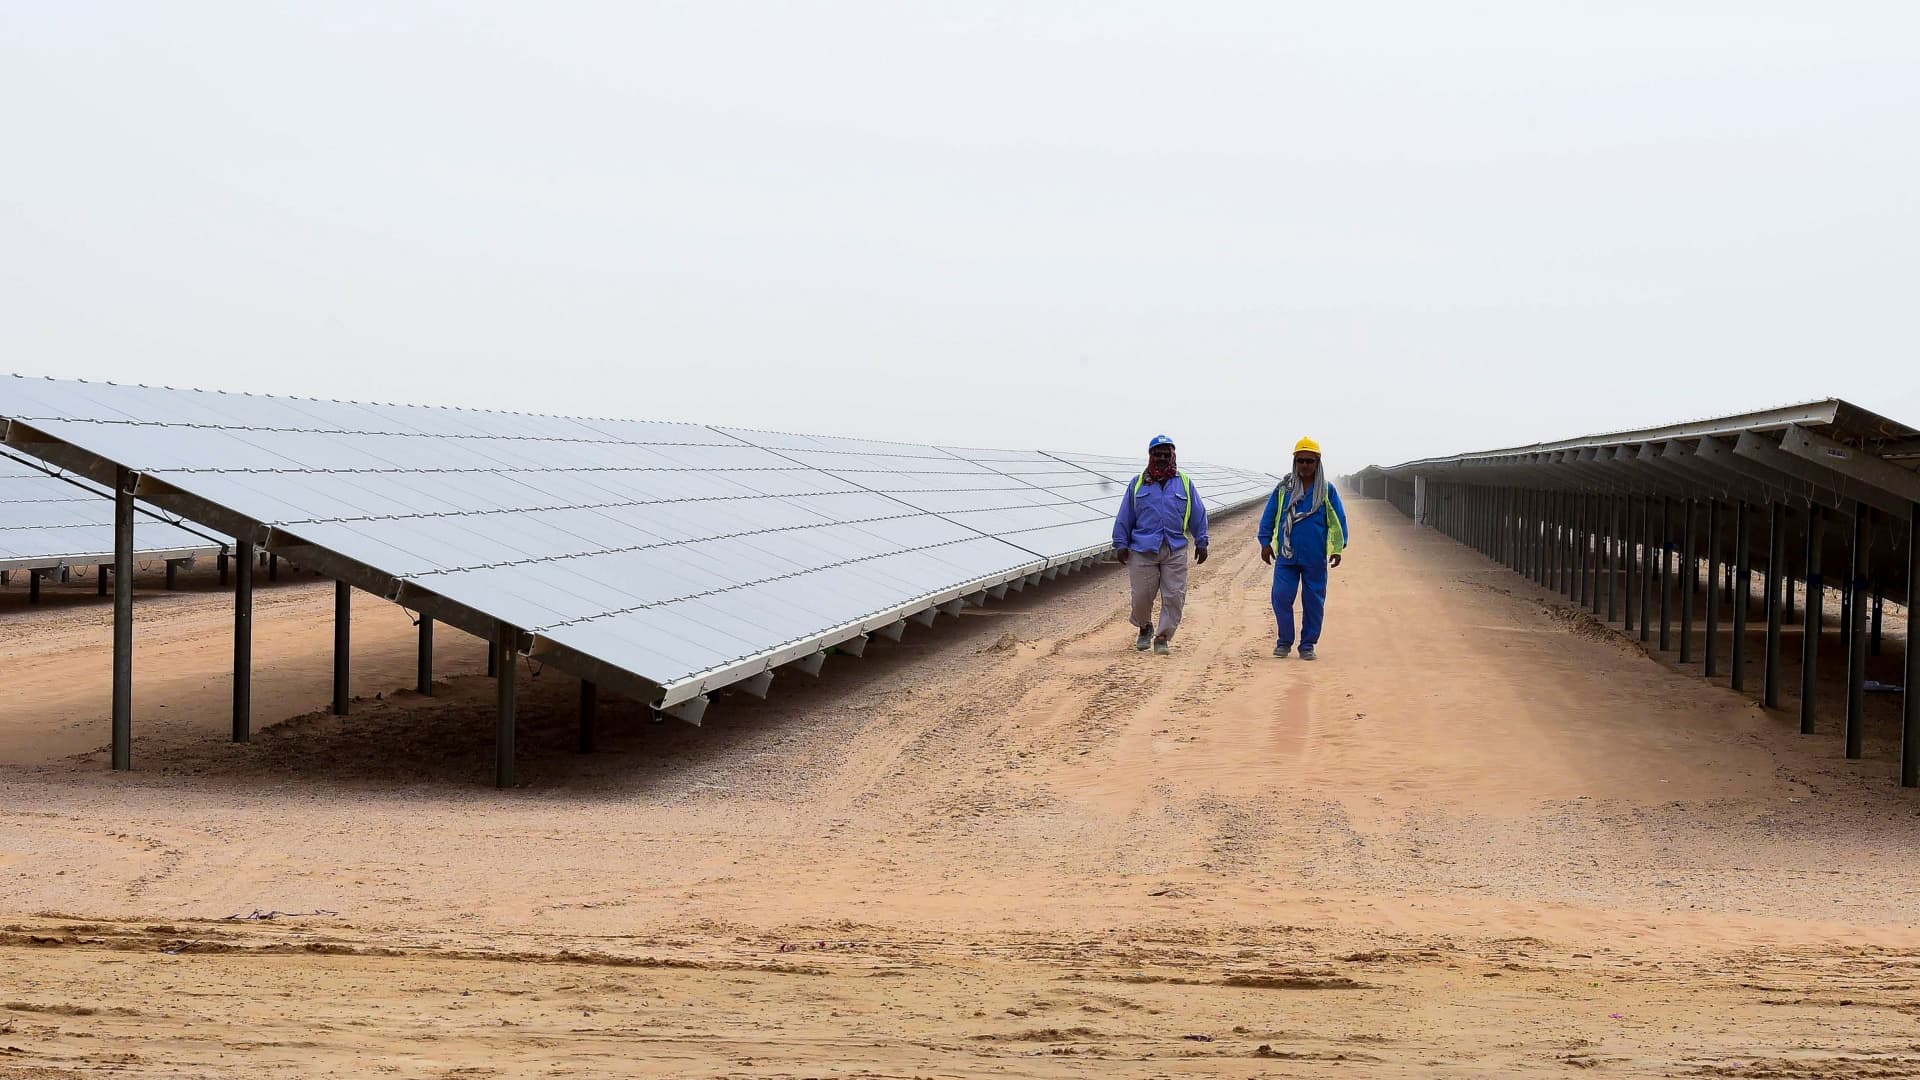 Workers photographed walking past a section of solar panels at the Mohammed bin Rashid Al-Maktoum Solar Park in Dubai on March 20, 2017.